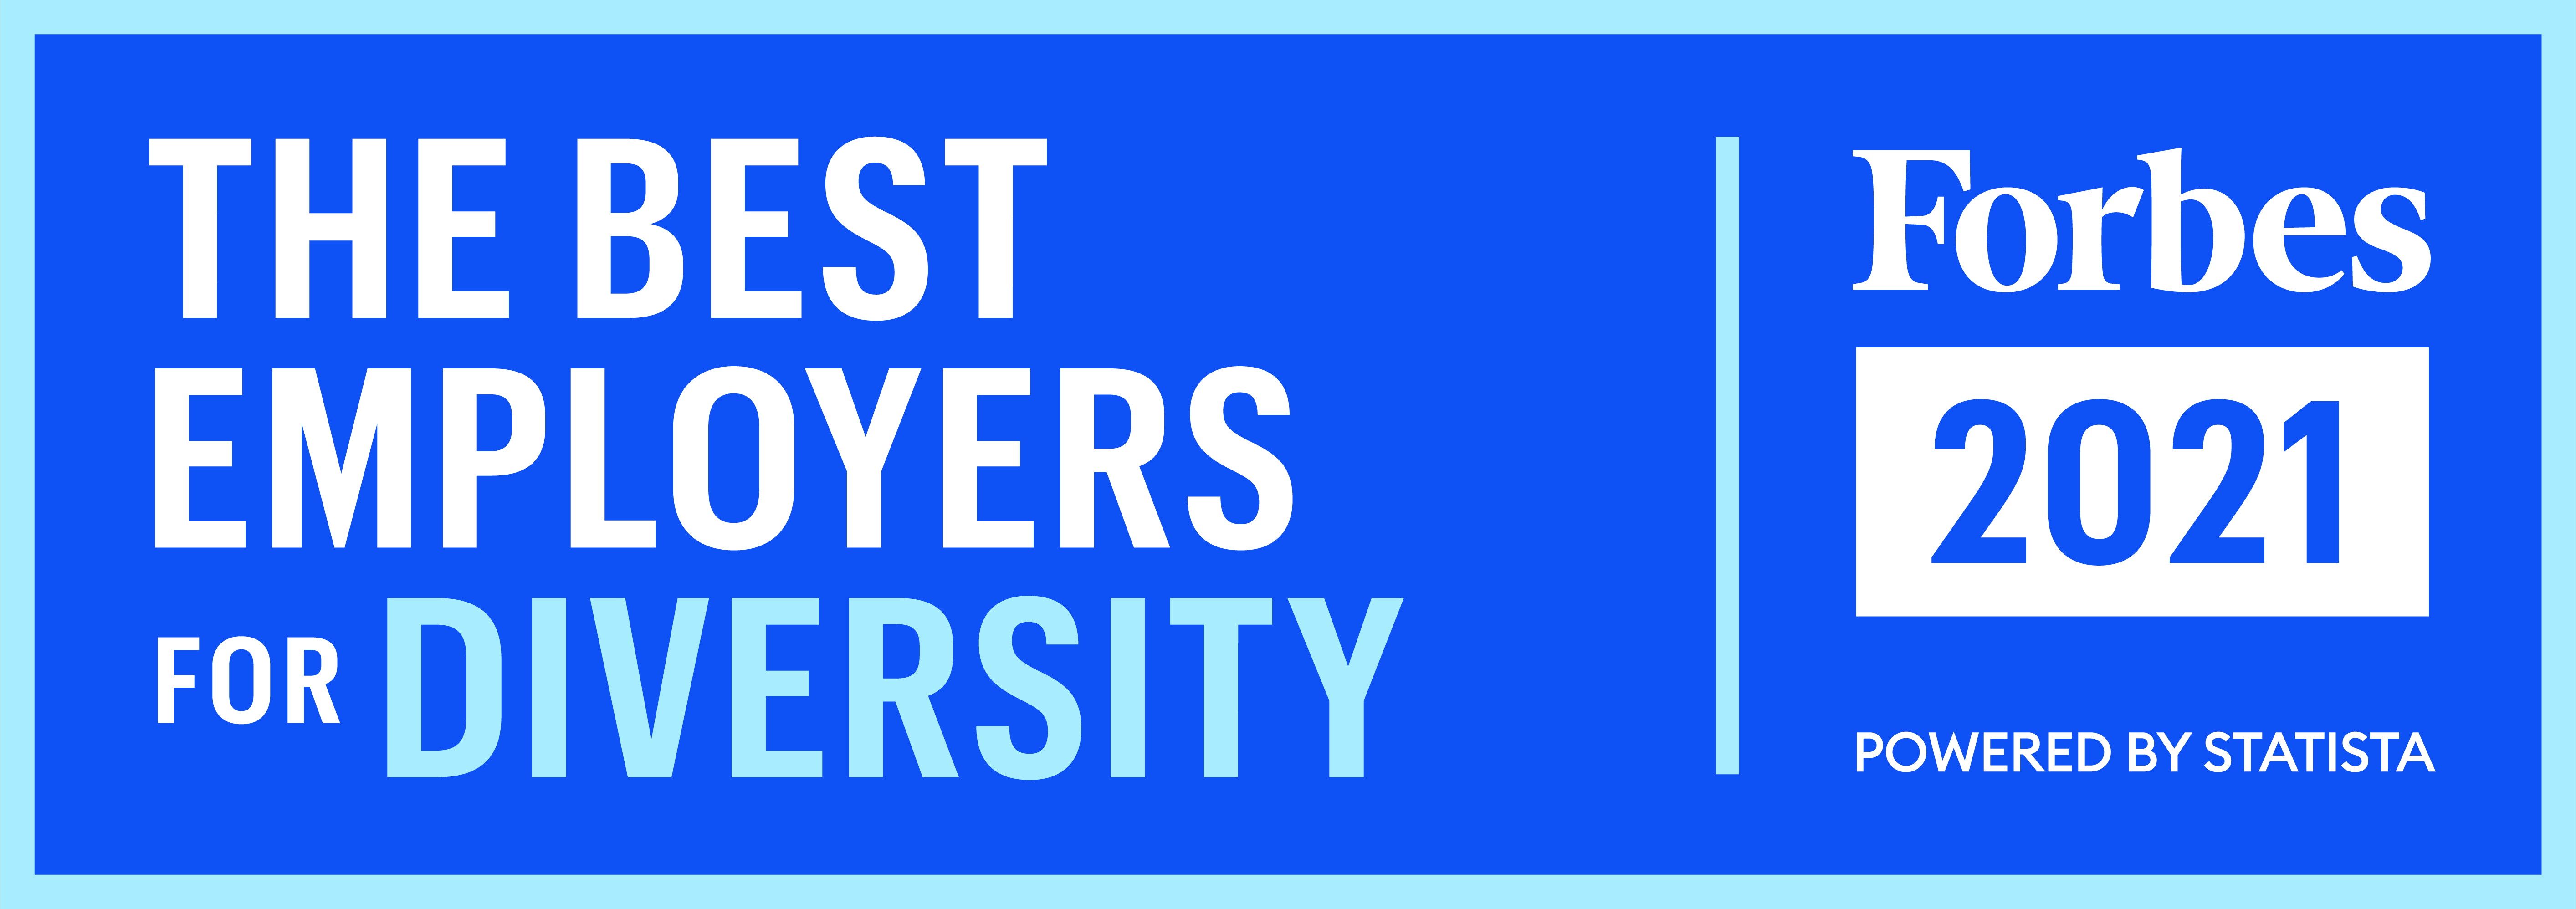 The Best Employers for Diversity 2021